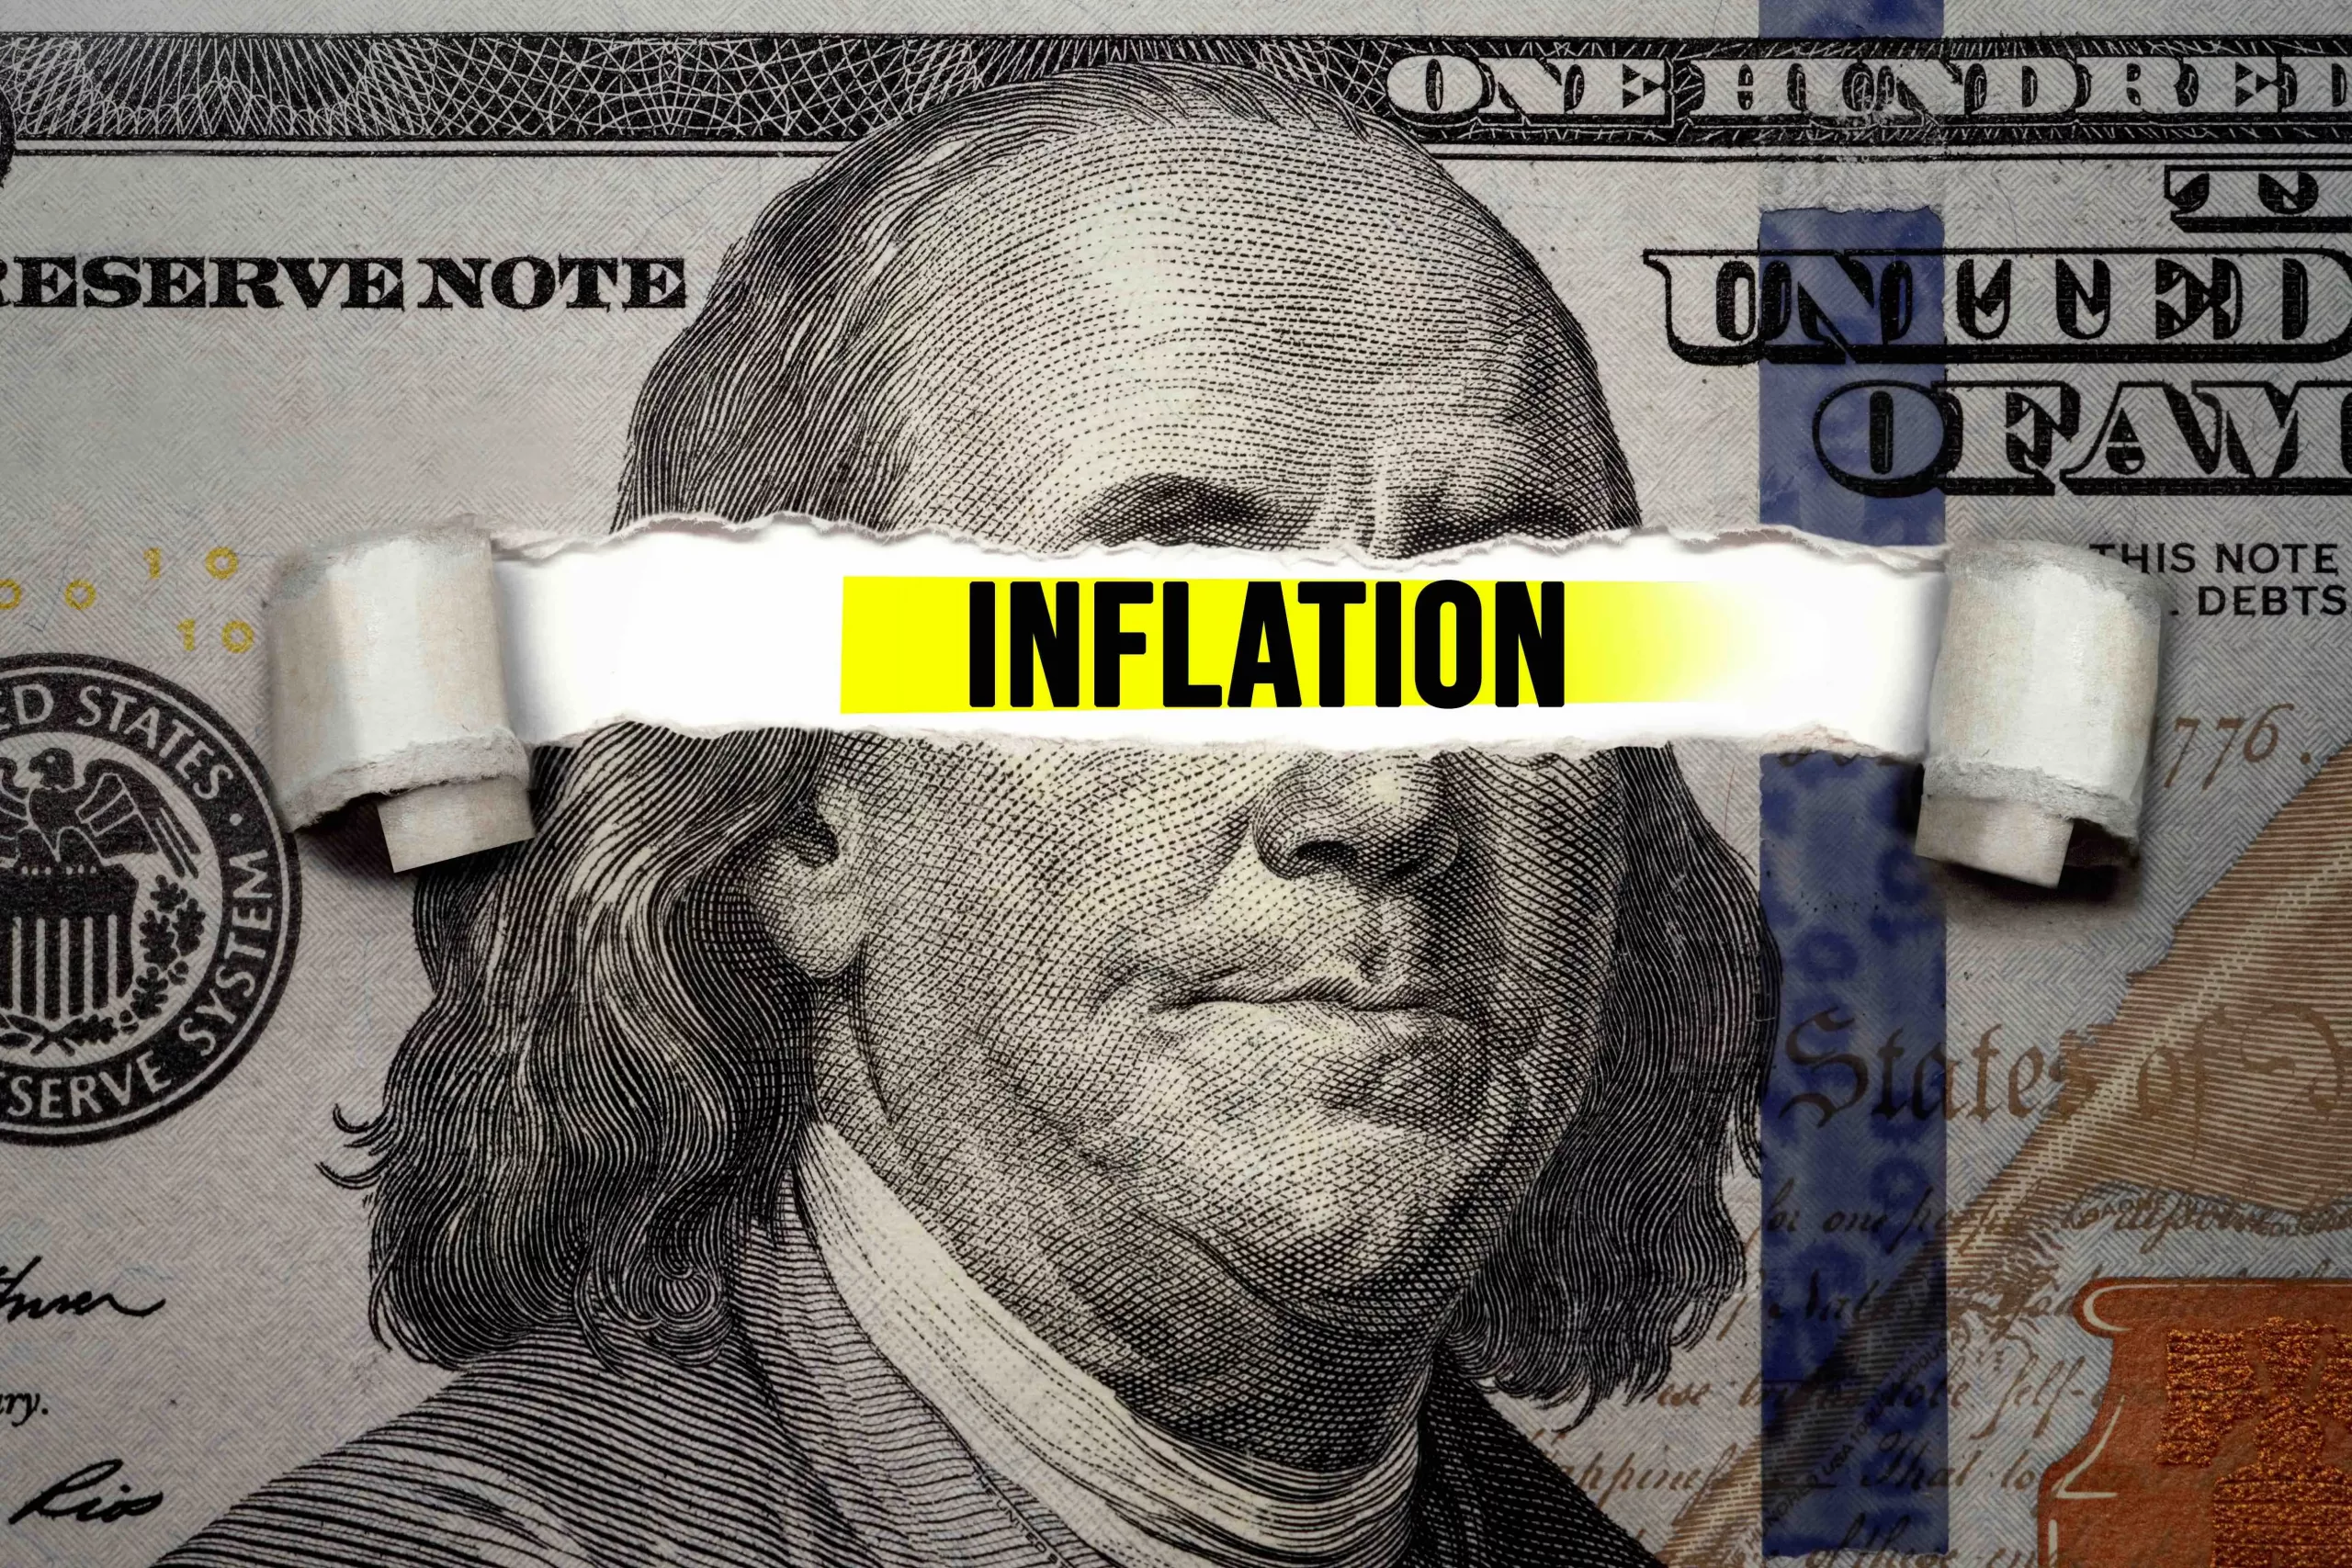 what is inflation